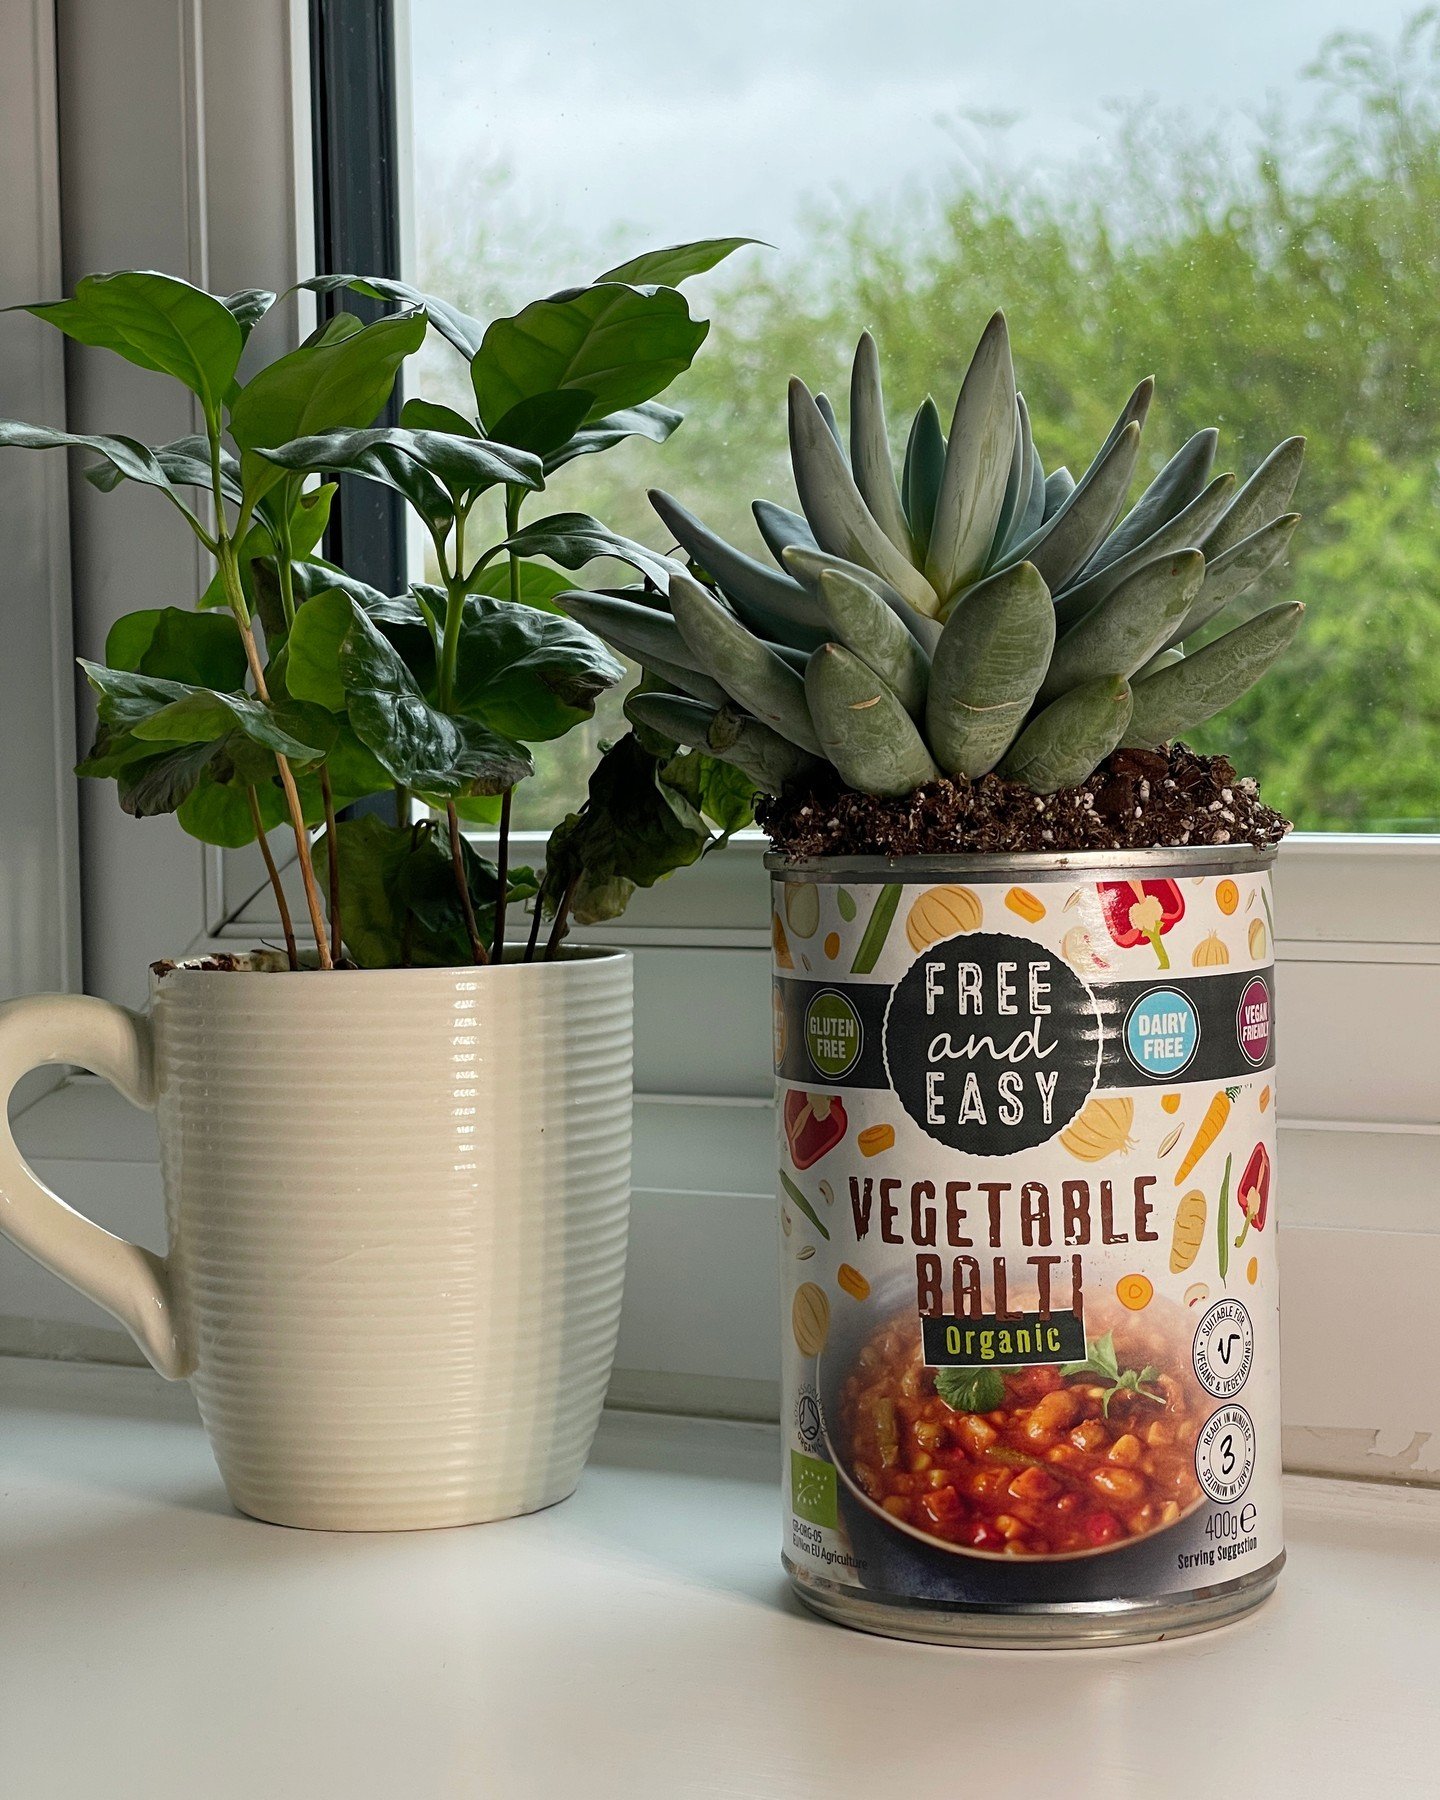 Don't throw out your tins when you're done with them - they've got plenty of uses! 

One of our favourites is to act as a small plant pot - this works great for small, decorative indoor plants, as well as keeping your seedlings safe before they go ou